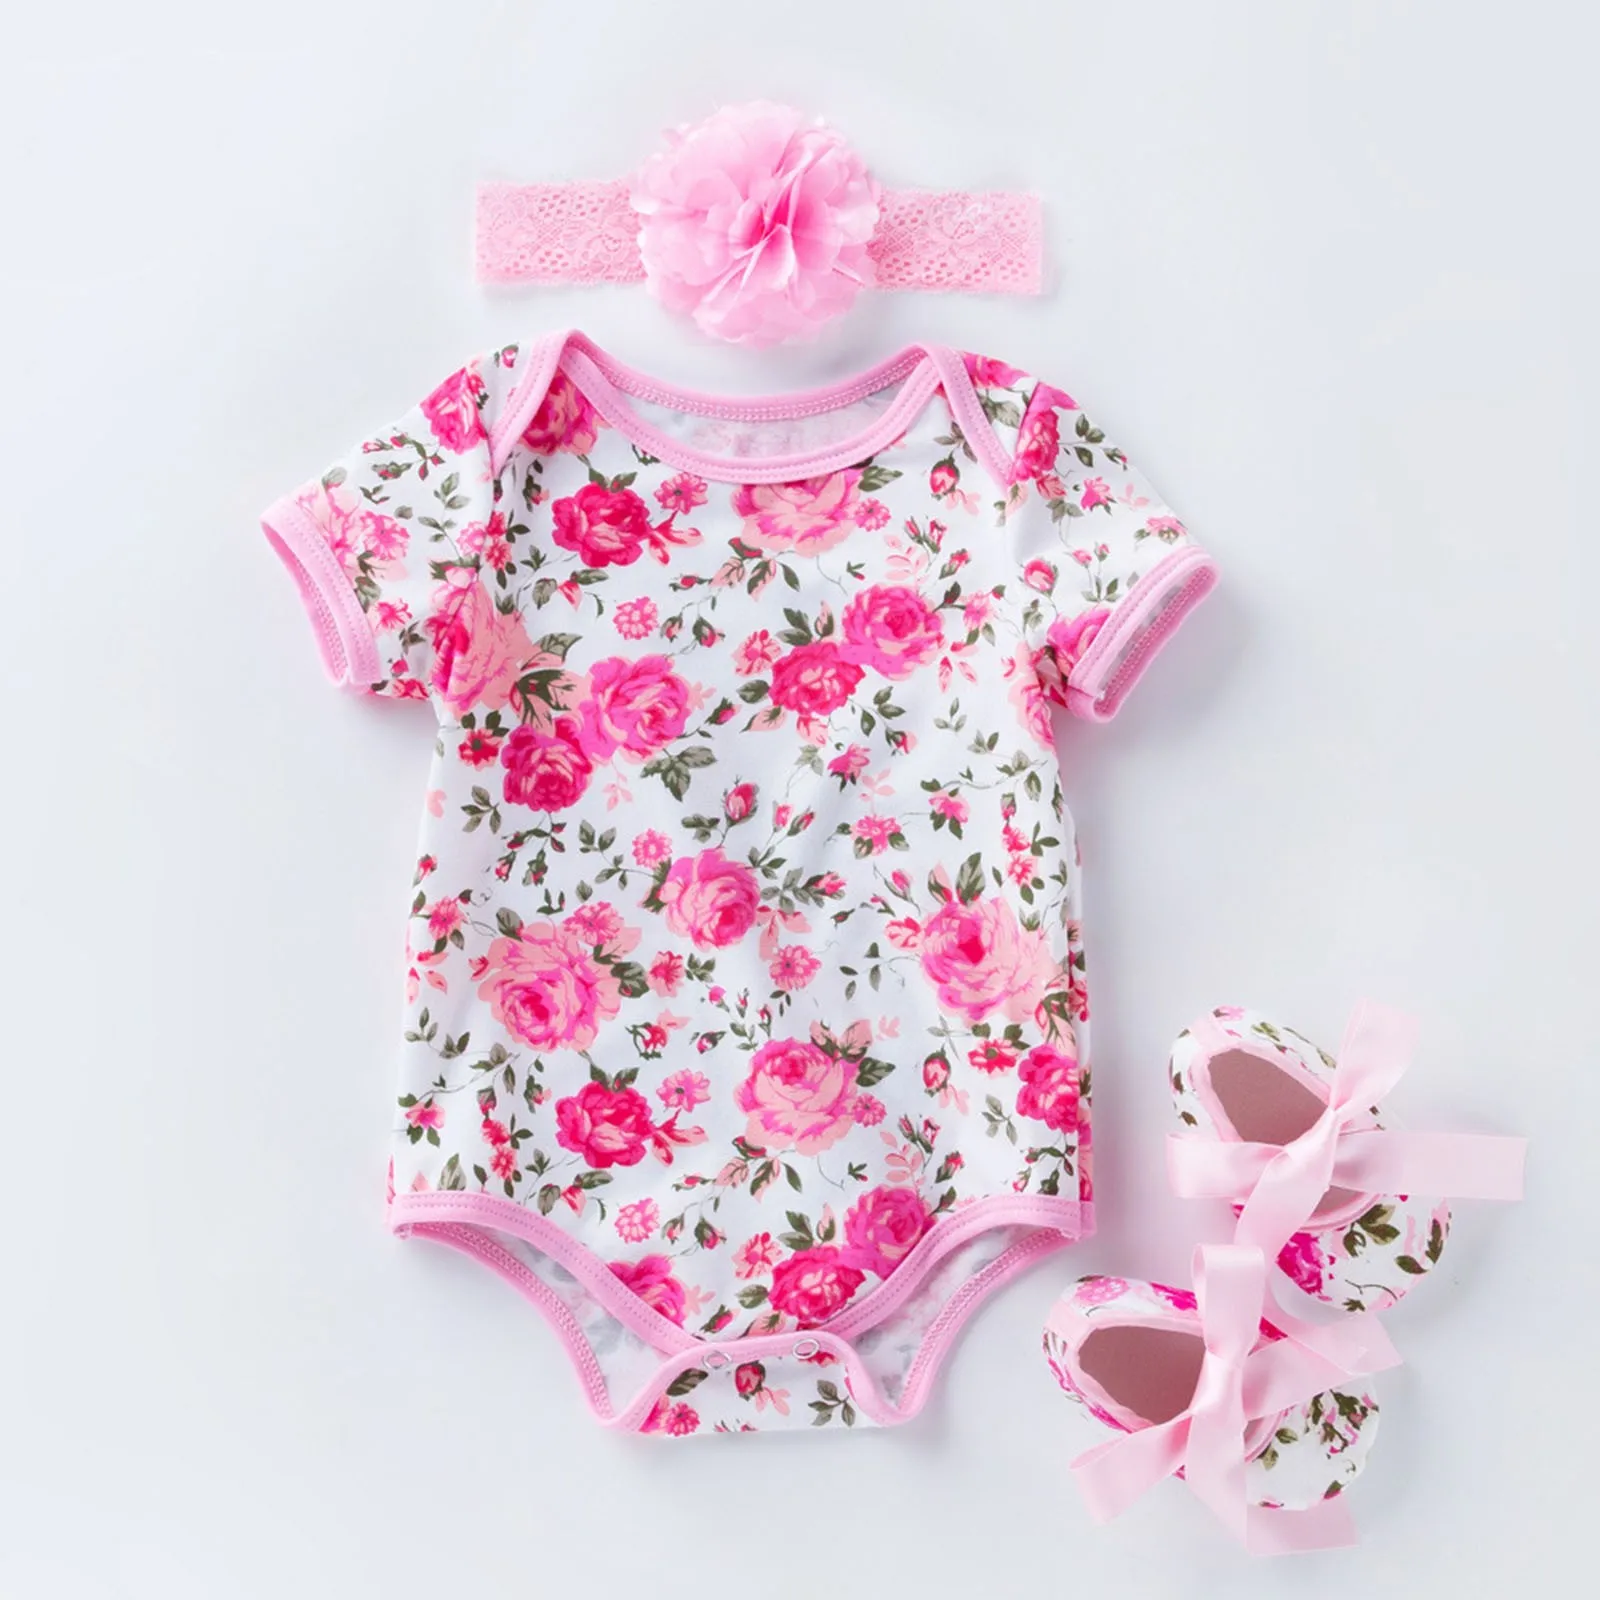 Mini Influencer Toddler Children's Casual Tops & Tees Baby Girls Clothes  Baby Clothes Fashion Style T-shirts for Boys Girls